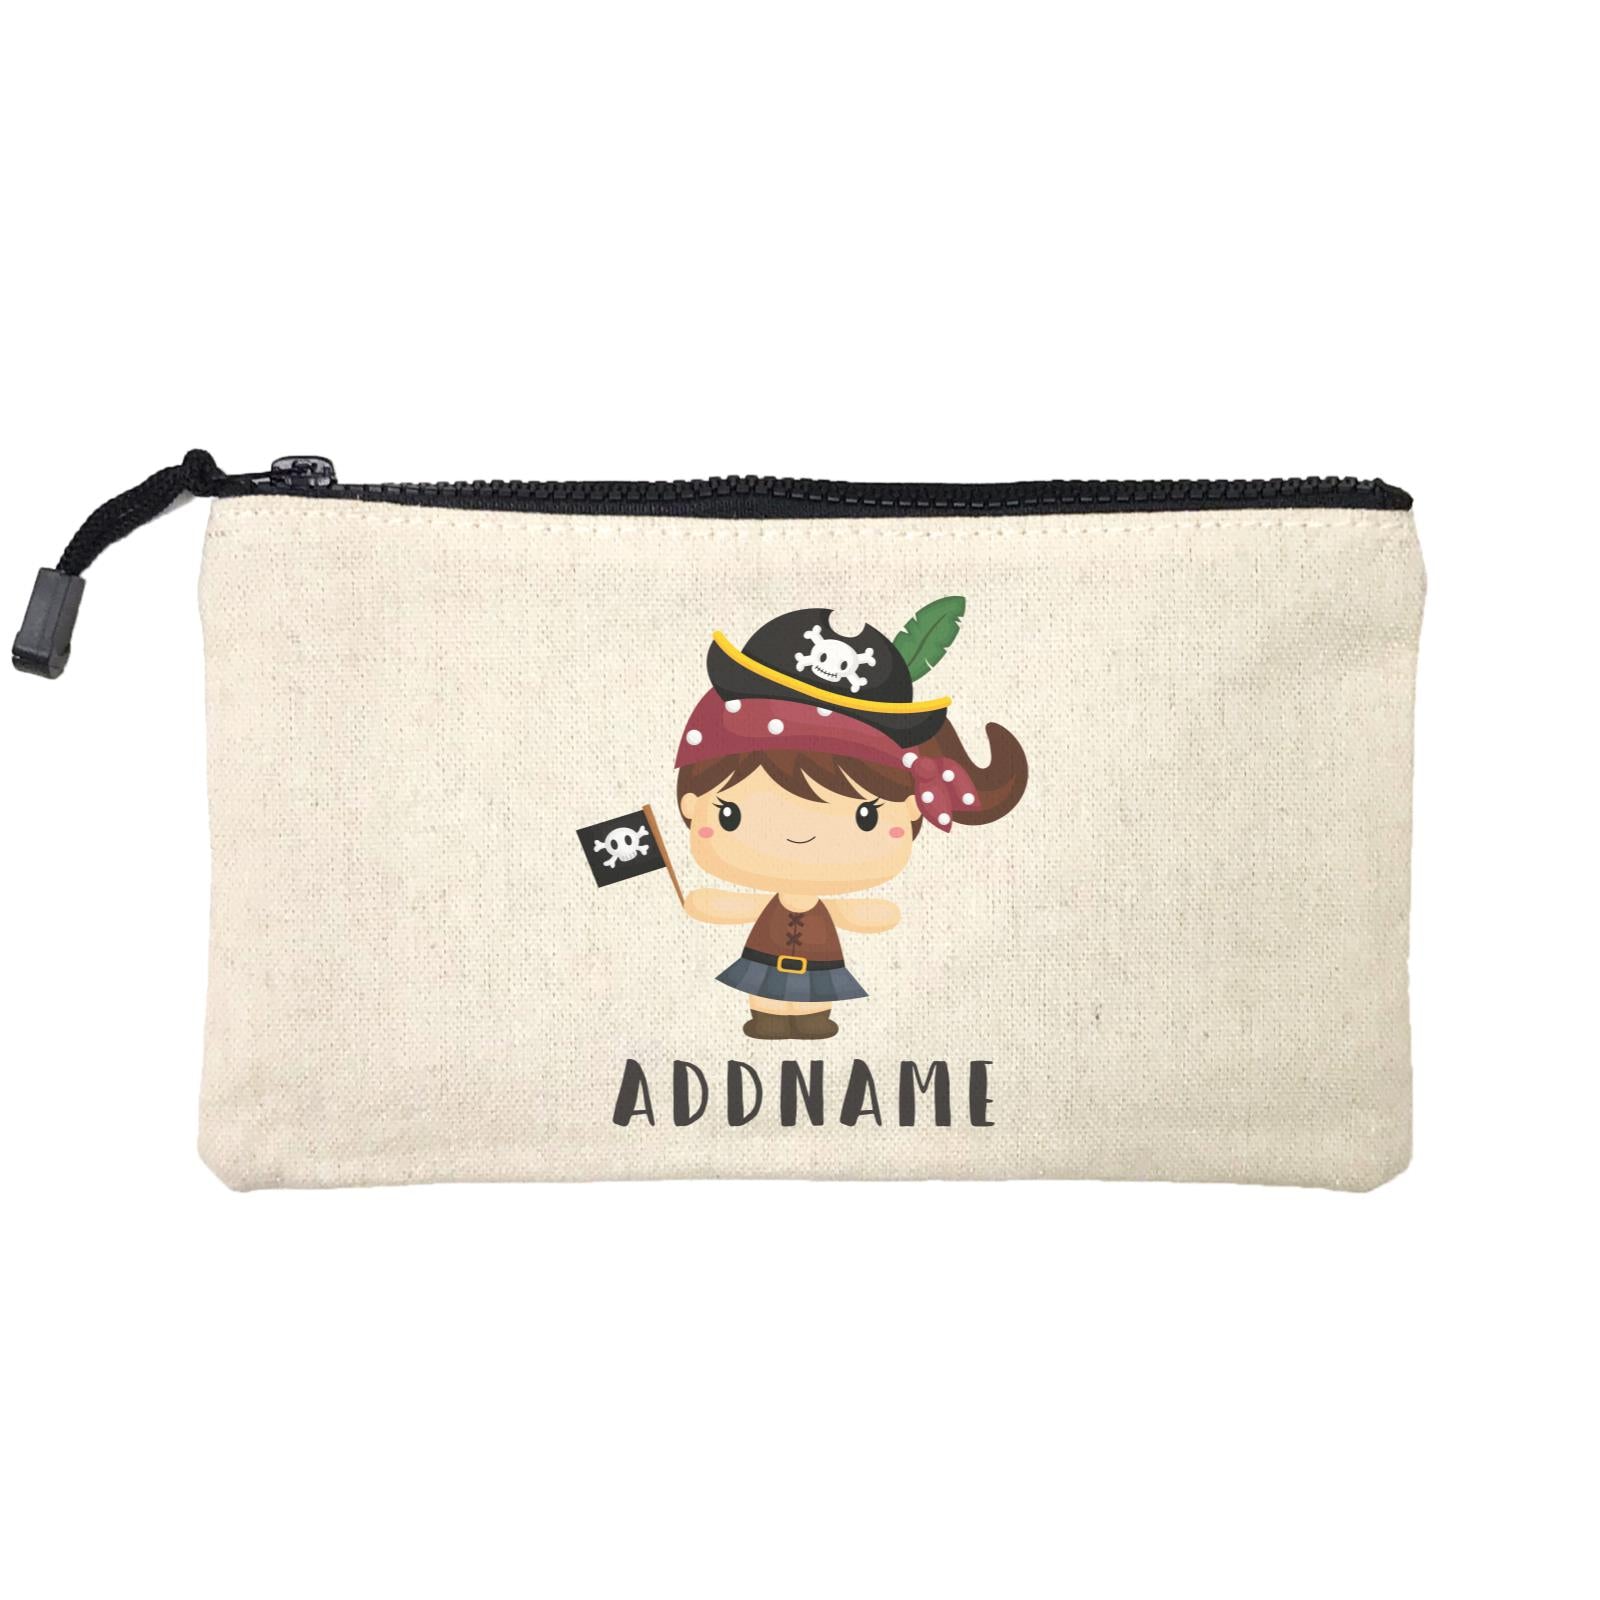 Birthday Pirate Happy Girl Captain Holding Pirate Flag Addname Mini Accessories Stationery Pouch